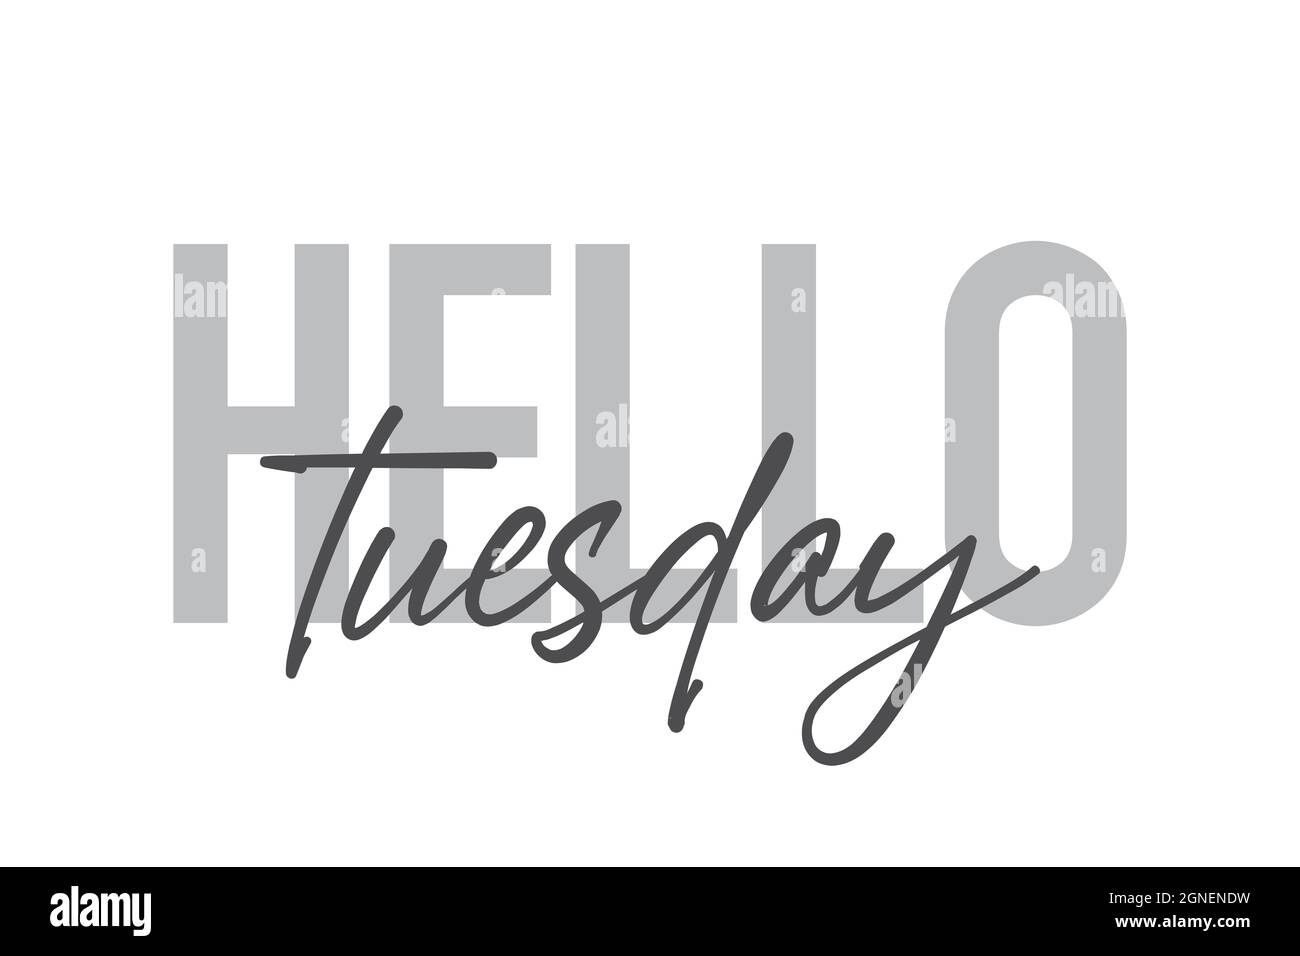 Modern, simple, minimal typographic design of a saying 'Hello Tuesday' in tones of grey color. Cool, urban, trendy and playful graphic vector art with Stock Photo